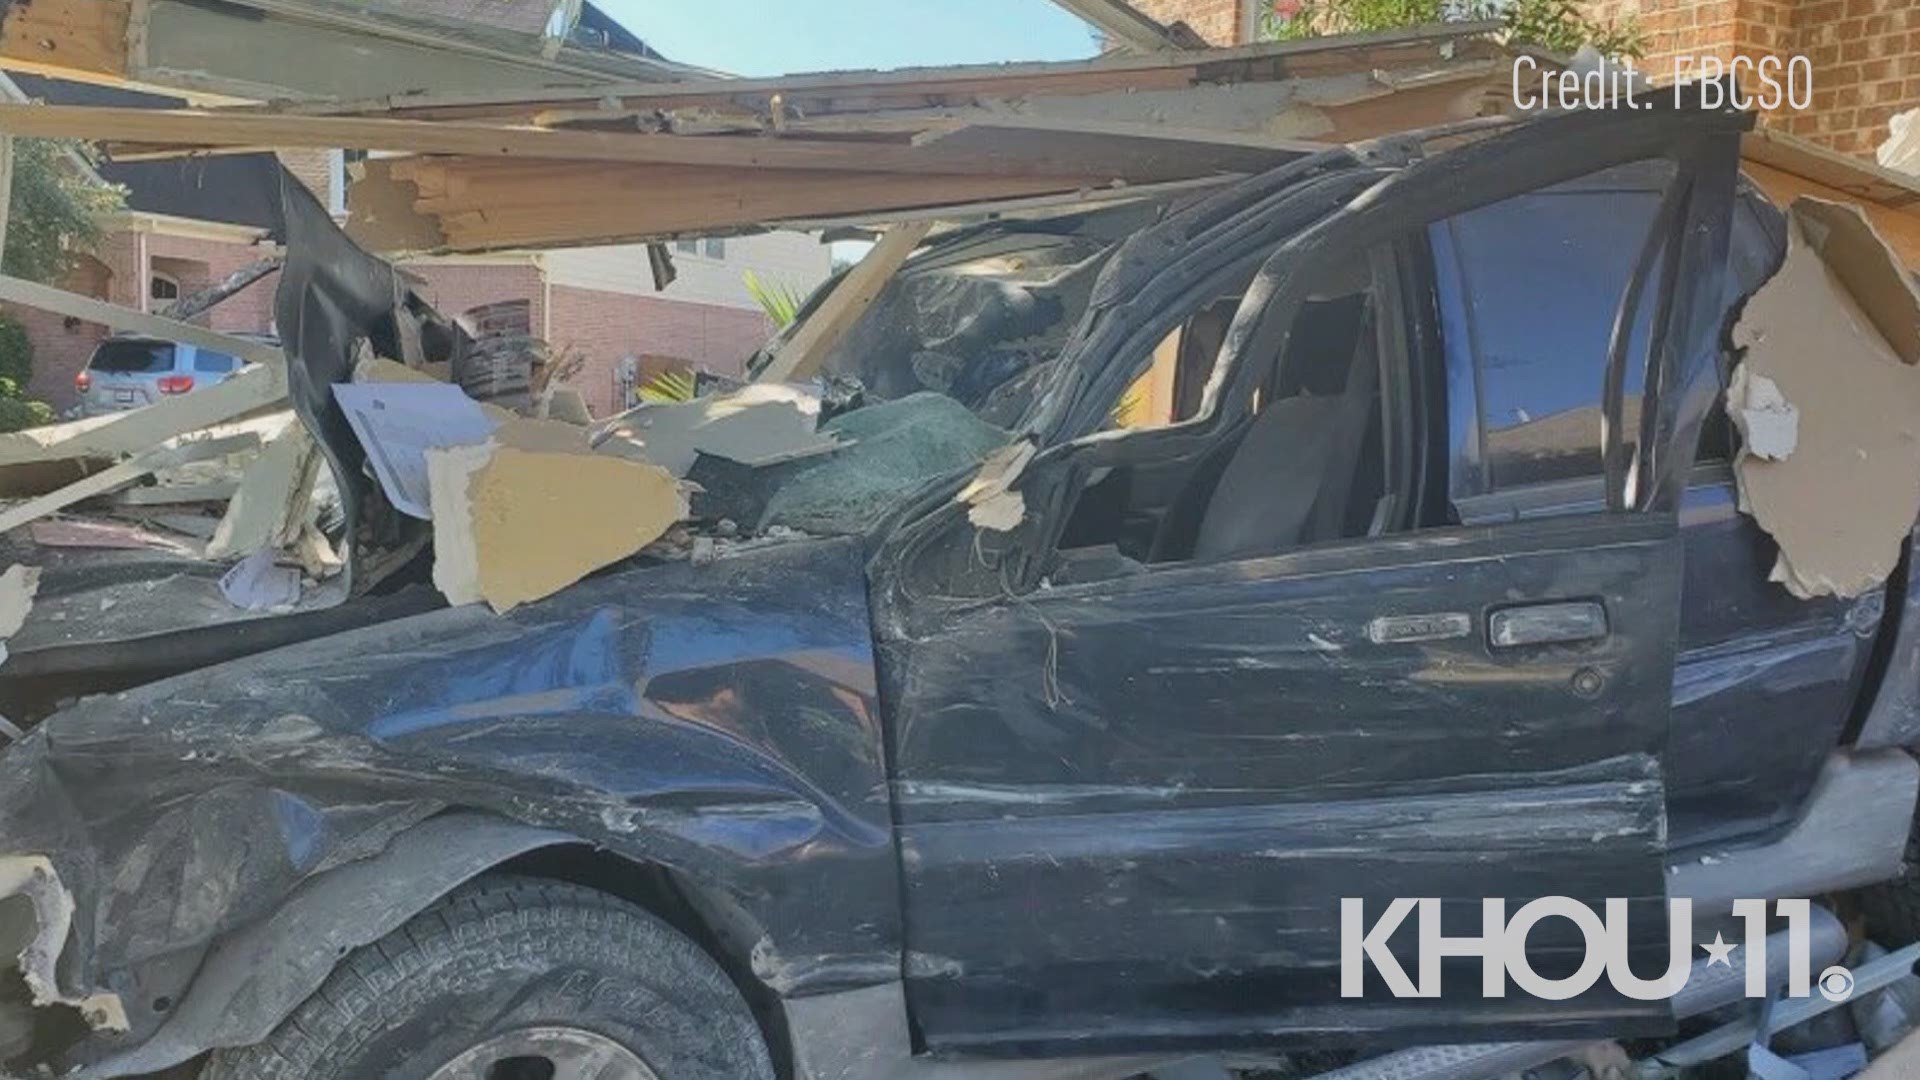 Sheriff's deputies in Fort Bend County arrested a driver after they allegedly crashed through a home. The driver is accused of trying to flee. No injuries.